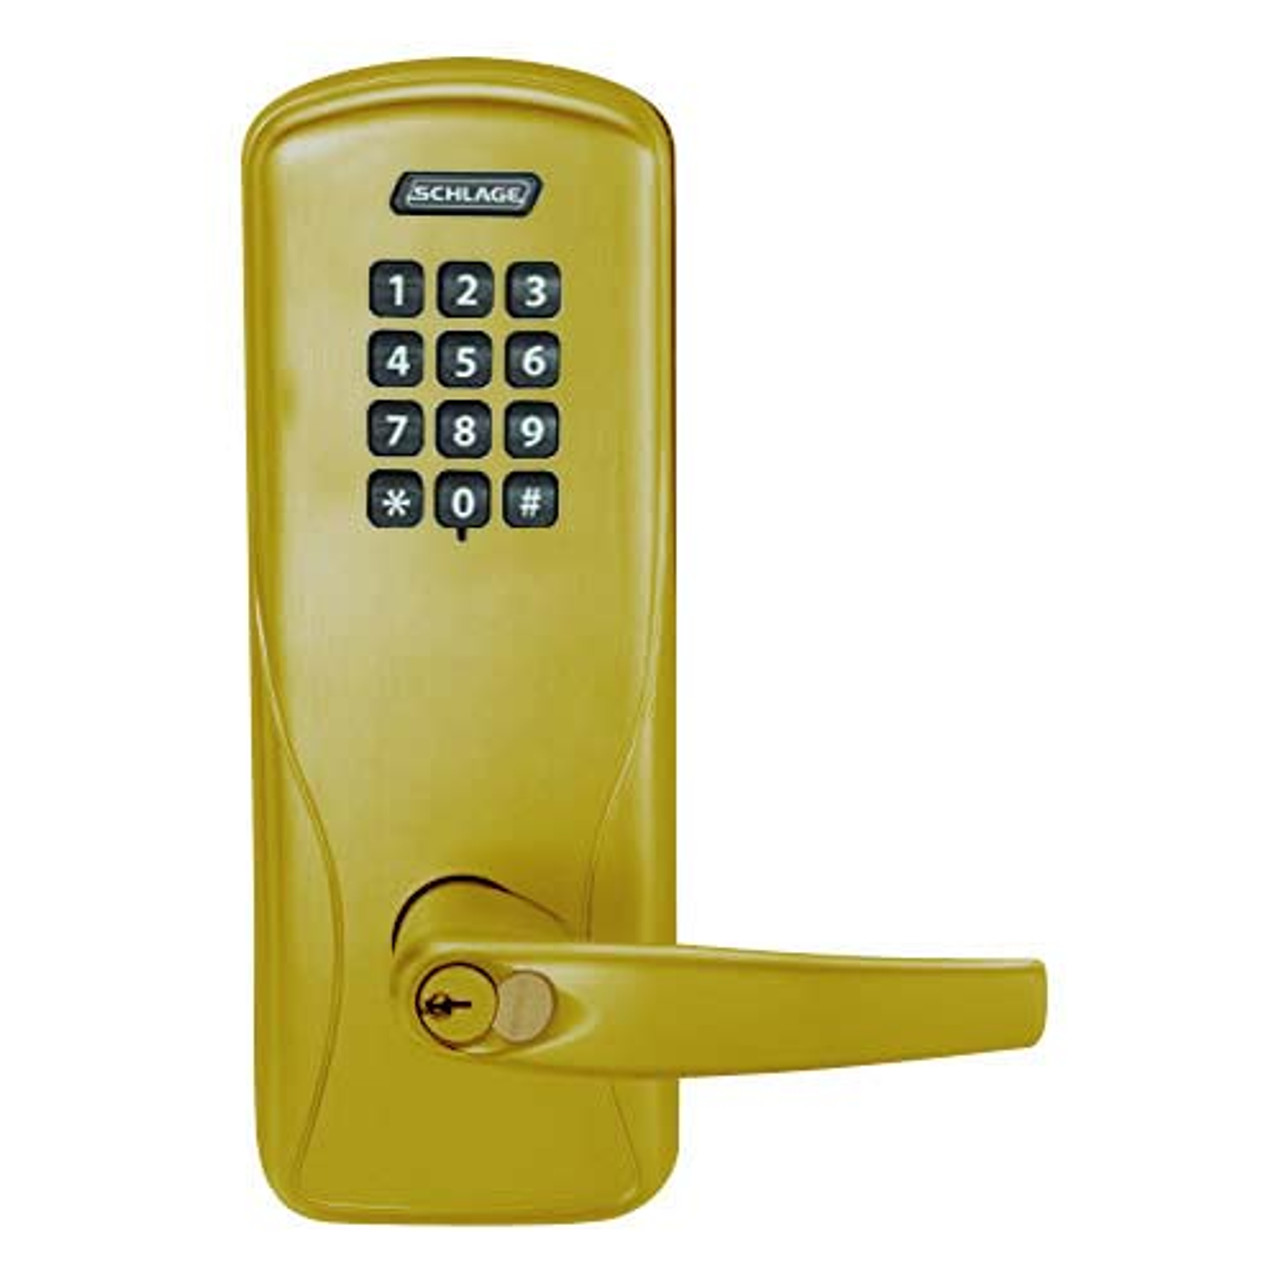 CO200-MS-70-KP-ATH-GD-29R-606 Mortise Electronic Keypad Locks in Satin Brass